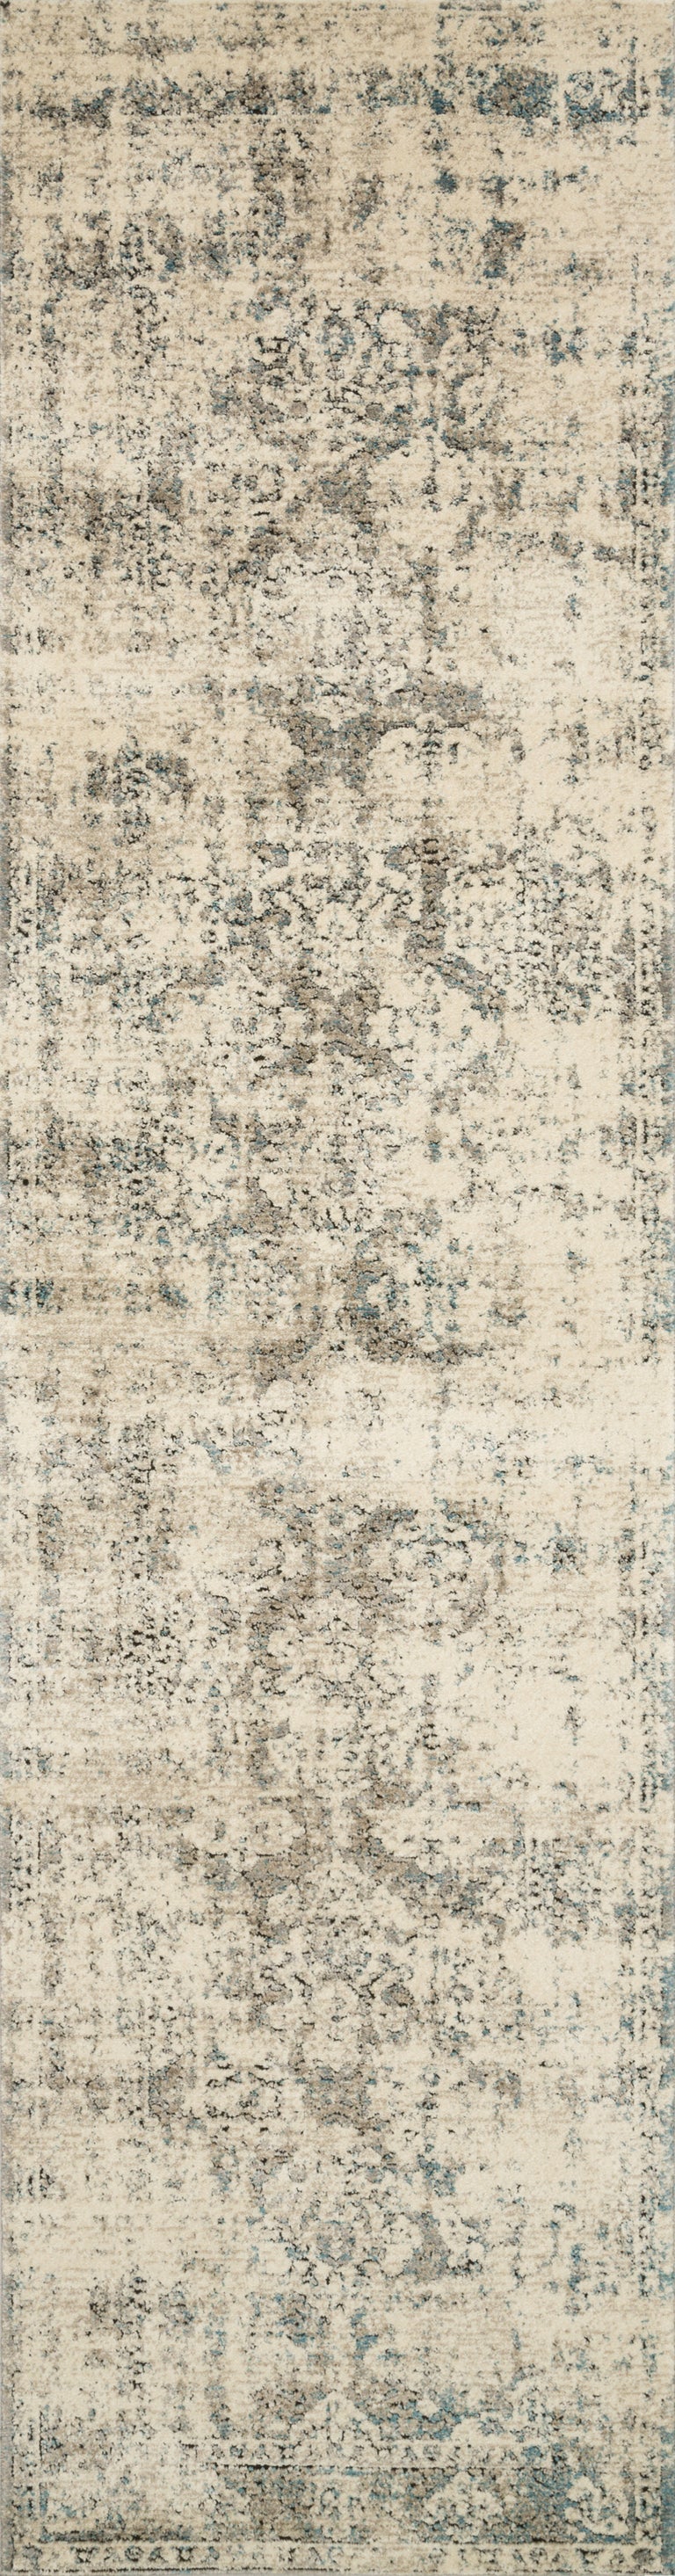 Loloi Rugs Millennium Collection Rug in Ivory, Grey - 7'10" x 10'6"